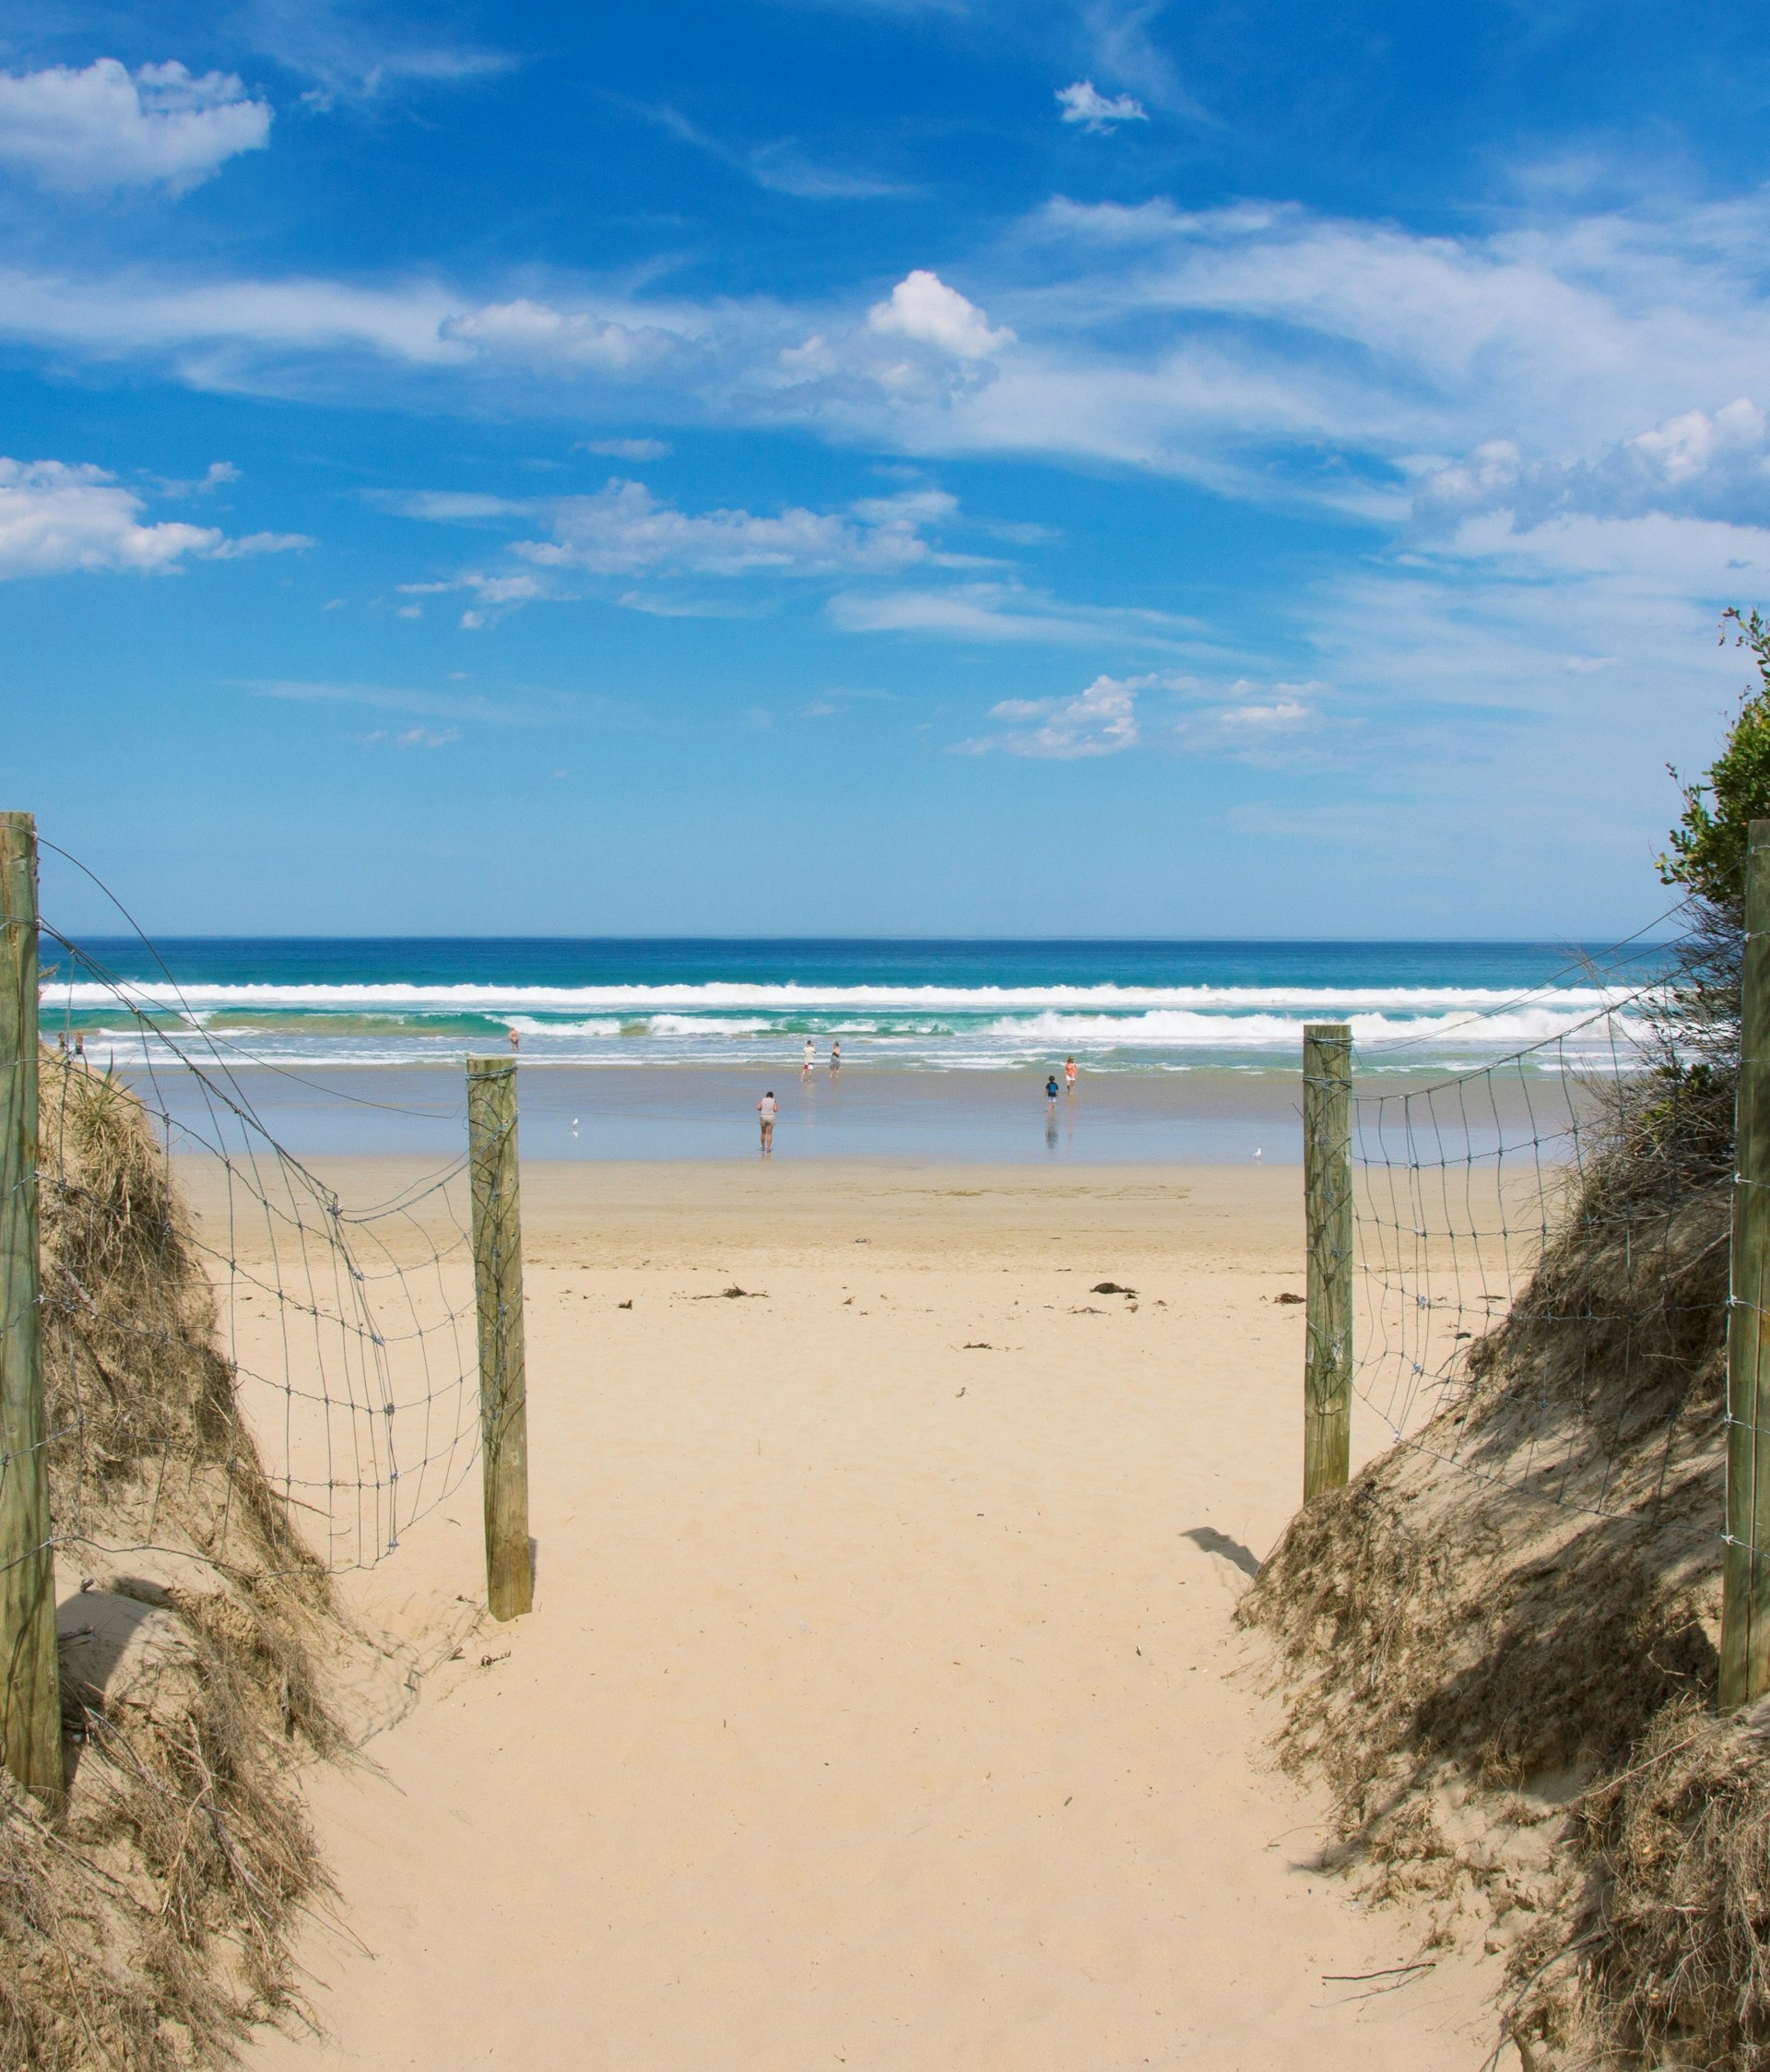 A view of an empty strip of beach located just off The Great Ocean Road, near the town of Lorne, Australia.